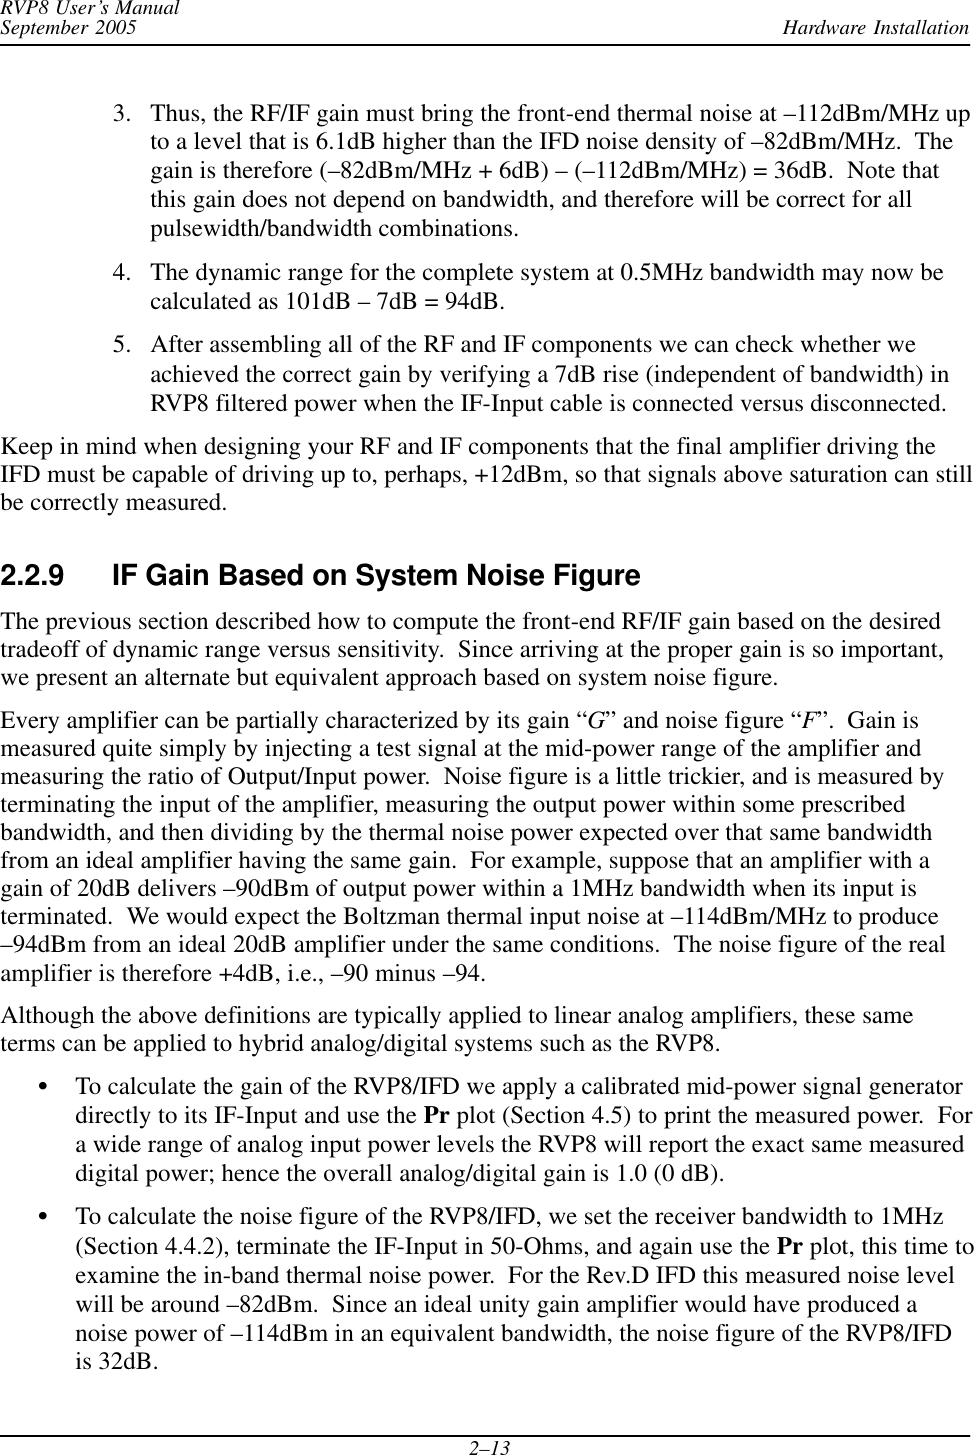 Hardware InstallationRVP8 User’s ManualSeptember 20052–133. Thus, the RF/IF gain must bring the front-end thermal noise at –112dBm/MHz upto a level that is 6.1dB higher than the IFD noise density of –82dBm/MHz.  Thegain is therefore (–82dBm/MHz + 6dB) – (–112dBm/MHz) = 36dB.  Note thatthis gain does not depend on bandwidth, and therefore will be correct for allpulsewidth/bandwidth combinations.4. The dynamic range for the complete system at 0.5MHz bandwidth may now becalculated as 101dB – 7dB = 94dB.5. After assembling all of the RF and IF components we can check whether weachieved the correct gain by verifying a 7dB rise (independent of bandwidth) inRVP8 filtered power when the IF-Input cable is connected versus disconnected.Keep in mind when designing your RF and IF components that the final amplifier driving theIFD must be capable of driving up to, perhaps, +12dBm, so that signals above saturation can stillbe correctly measured.2.2.9 IF Gain Based on System Noise FigureThe previous section described how to compute the front-end RF/IF gain based on the desiredtradeoff of dynamic range versus sensitivity.  Since arriving at the proper gain is so important,we present an alternate but equivalent approach based on system noise figure.Every amplifier can be partially characterized by its gain “G” and noise figure “F”.  Gain ismeasured quite simply by injecting a test signal at the mid-power range of the amplifier andmeasuring the ratio of Output/Input power.  Noise figure is a little trickier, and is measured byterminating the input of the amplifier, measuring the output power within some prescribedbandwidth, and then dividing by the thermal noise power expected over that same bandwidthfrom an ideal amplifier having the same gain.  For example, suppose that an amplifier with again of 20dB delivers –90dBm of output power within a 1MHz bandwidth when its input isterminated.  We would expect the Boltzman thermal input noise at –114dBm/MHz to produce–94dBm from an ideal 20dB amplifier under the same conditions.  The noise figure of the realamplifier is therefore +4dB, i.e., –90 minus –94.Although the above definitions are typically applied to linear analog amplifiers, these sameterms can be applied to hybrid analog/digital systems such as the RVP8.STo calculate the gain of the RVP8/IFD we apply a calibrated mid-power signal generatordirectly to its IF-Input and use the Pr plot (Section 4.5) to print the measured power.  Fora wide range of analog input power levels the RVP8 will report the exact same measureddigital power; hence the overall analog/digital gain is 1.0 (0 dB).STo calculate the noise figure of the RVP8/IFD, we set the receiver bandwidth to 1MHz(Section 4.4.2), terminate the IF-Input in 50-Ohms, and again use the Pr plot, this time toexamine the in-band thermal noise power.  For the Rev.D IFD this measured noise levelwill be around –82dBm.  Since an ideal unity gain amplifier would have produced anoise power of –114dBm in an equivalent bandwidth, the noise figure of the RVP8/IFDis 32dB.